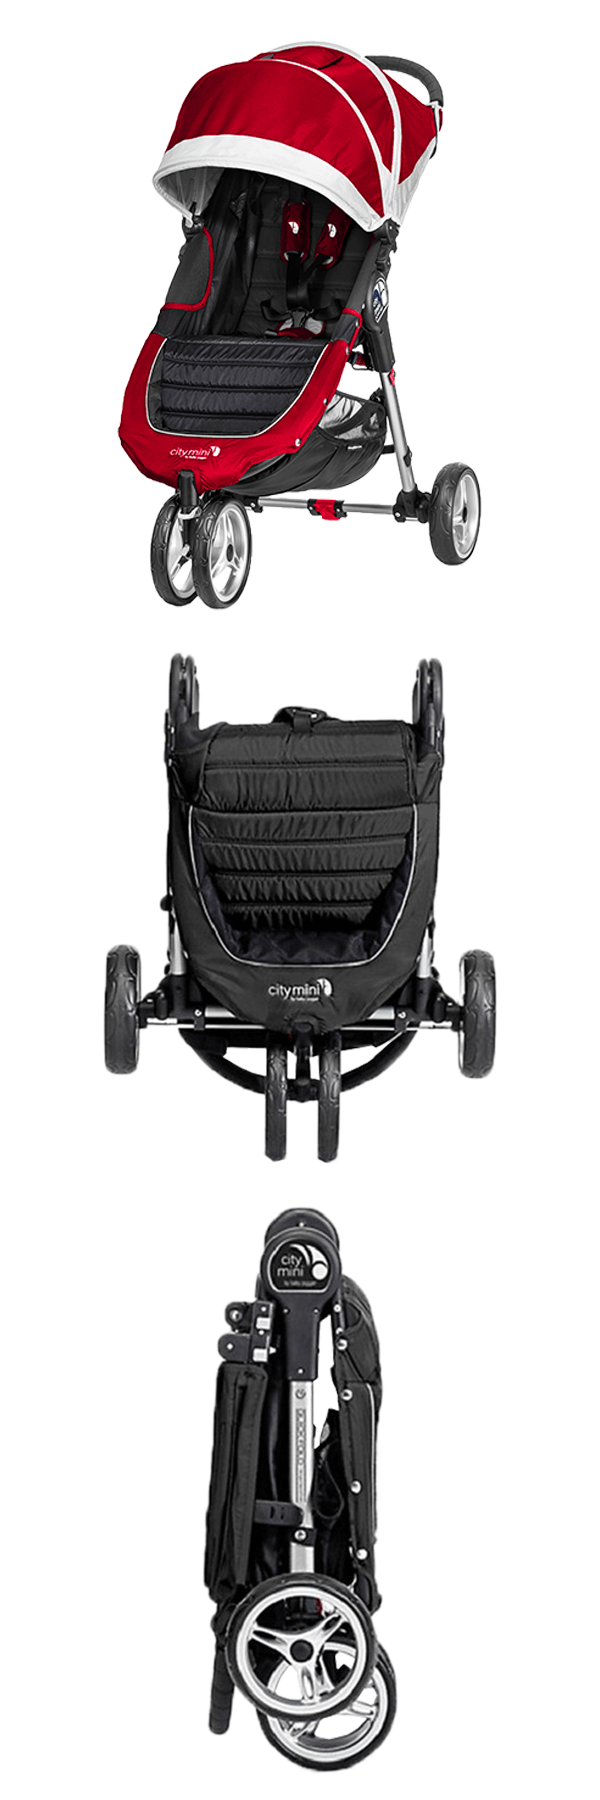 Baby Jogger City Mini Stroller configurations